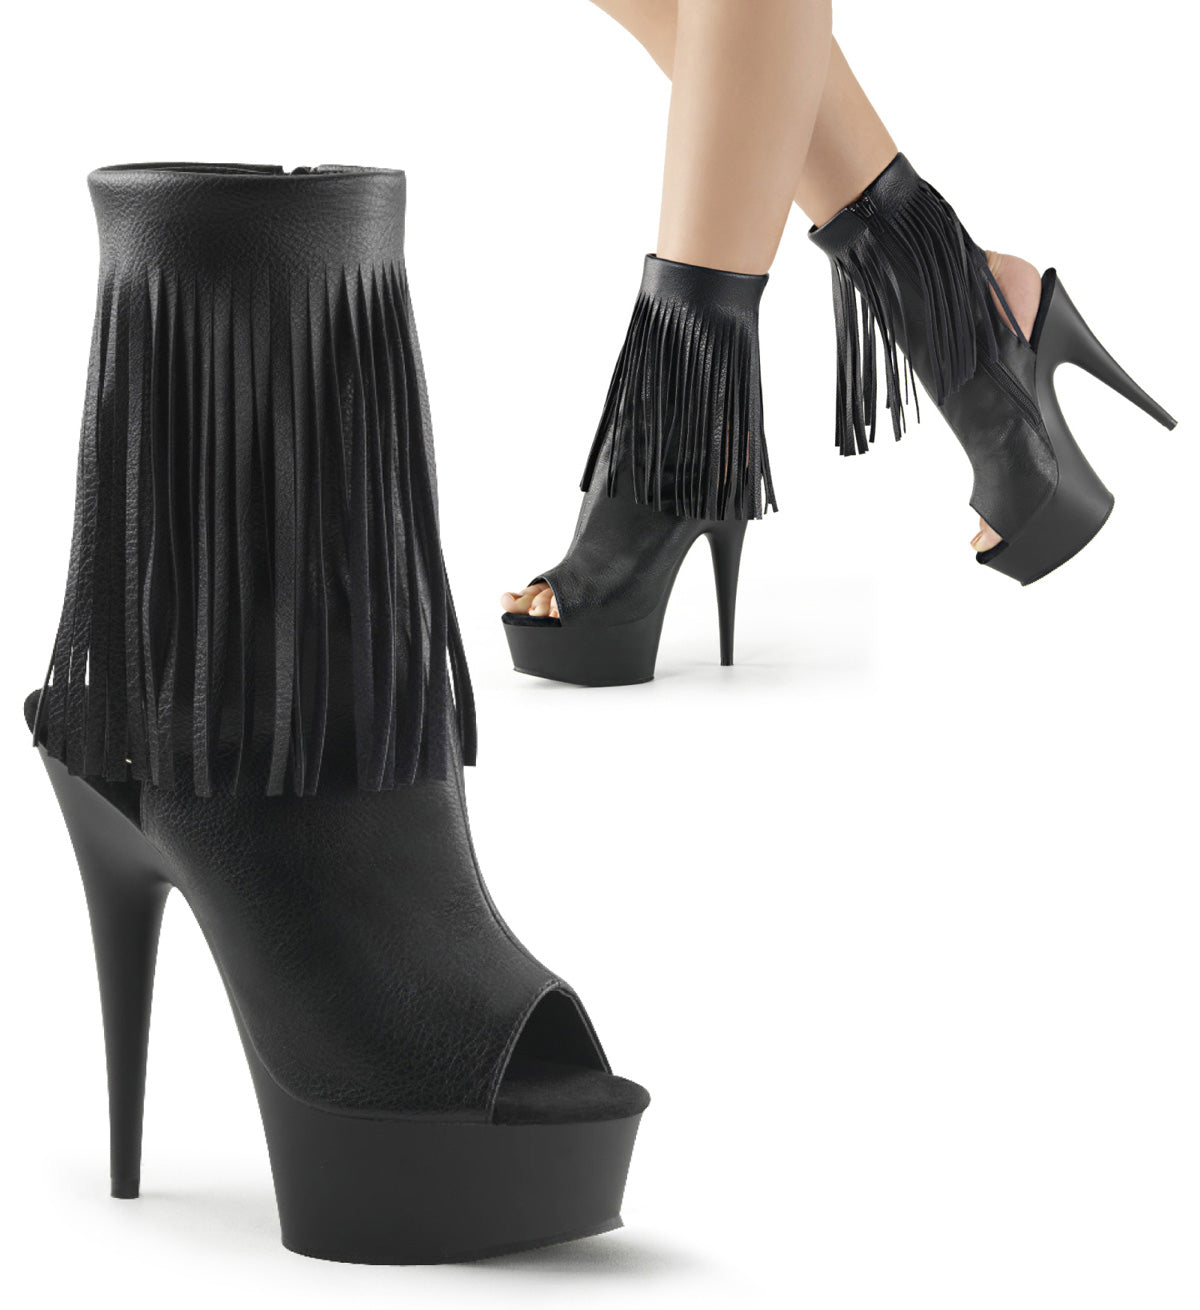 DELIGHT-1019 Black Faux Leather Boot Pleaser